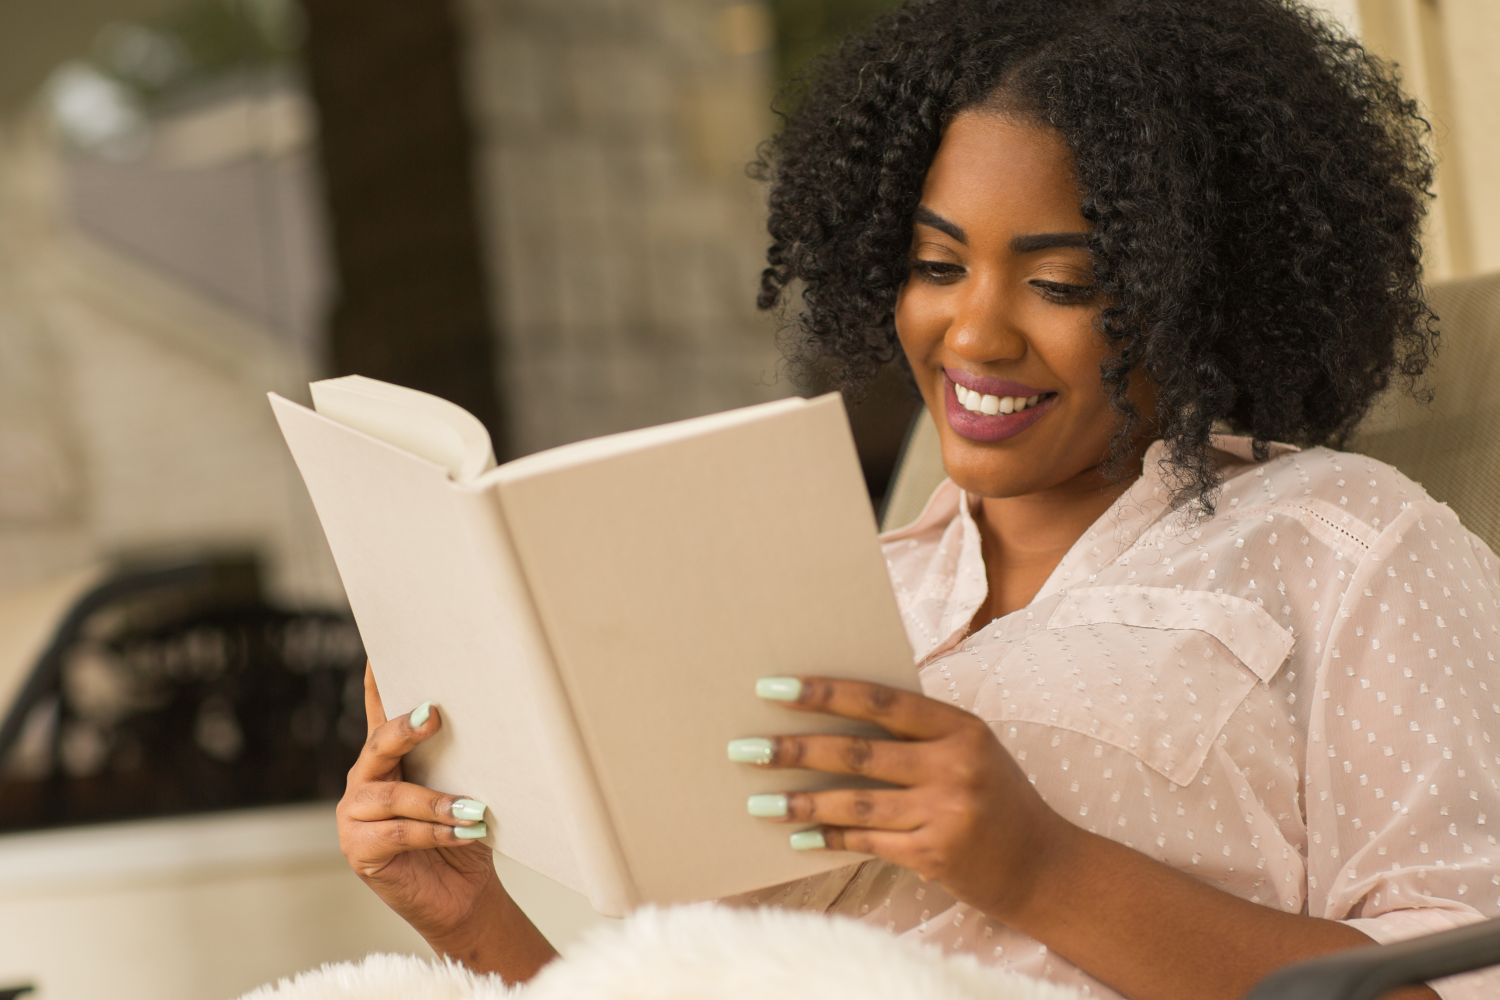 6 Life Changing Books Every Christian Should Read